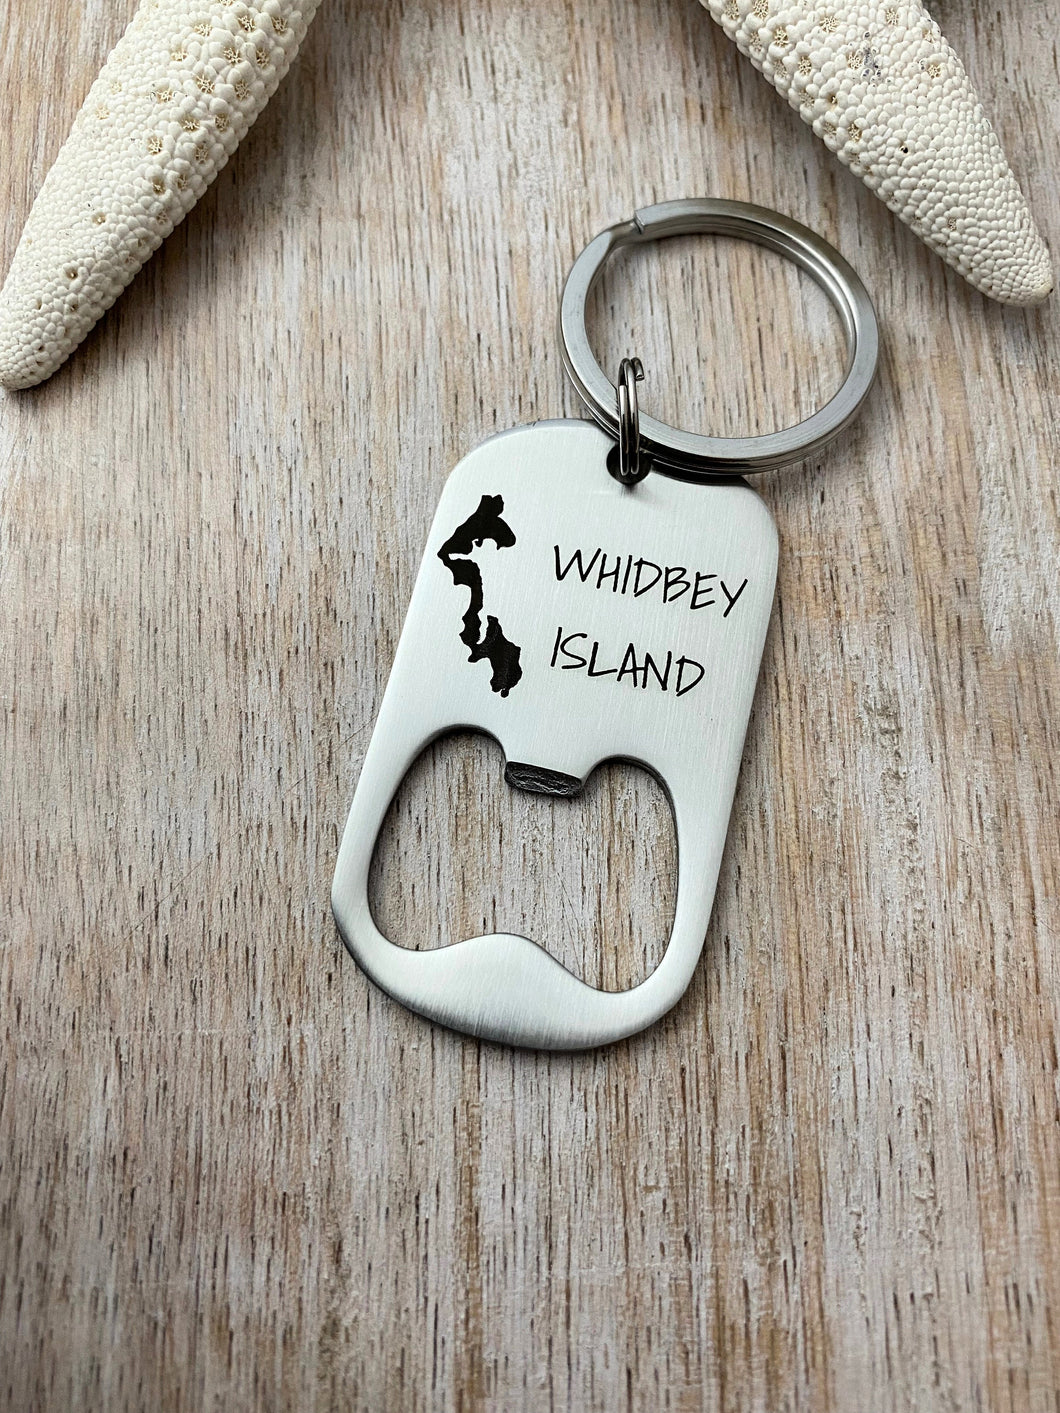 Whidbey Island - stainless steel bottle opener keychain - gift for him - gift for husband - beer bottle opener key ring - Island silhouette